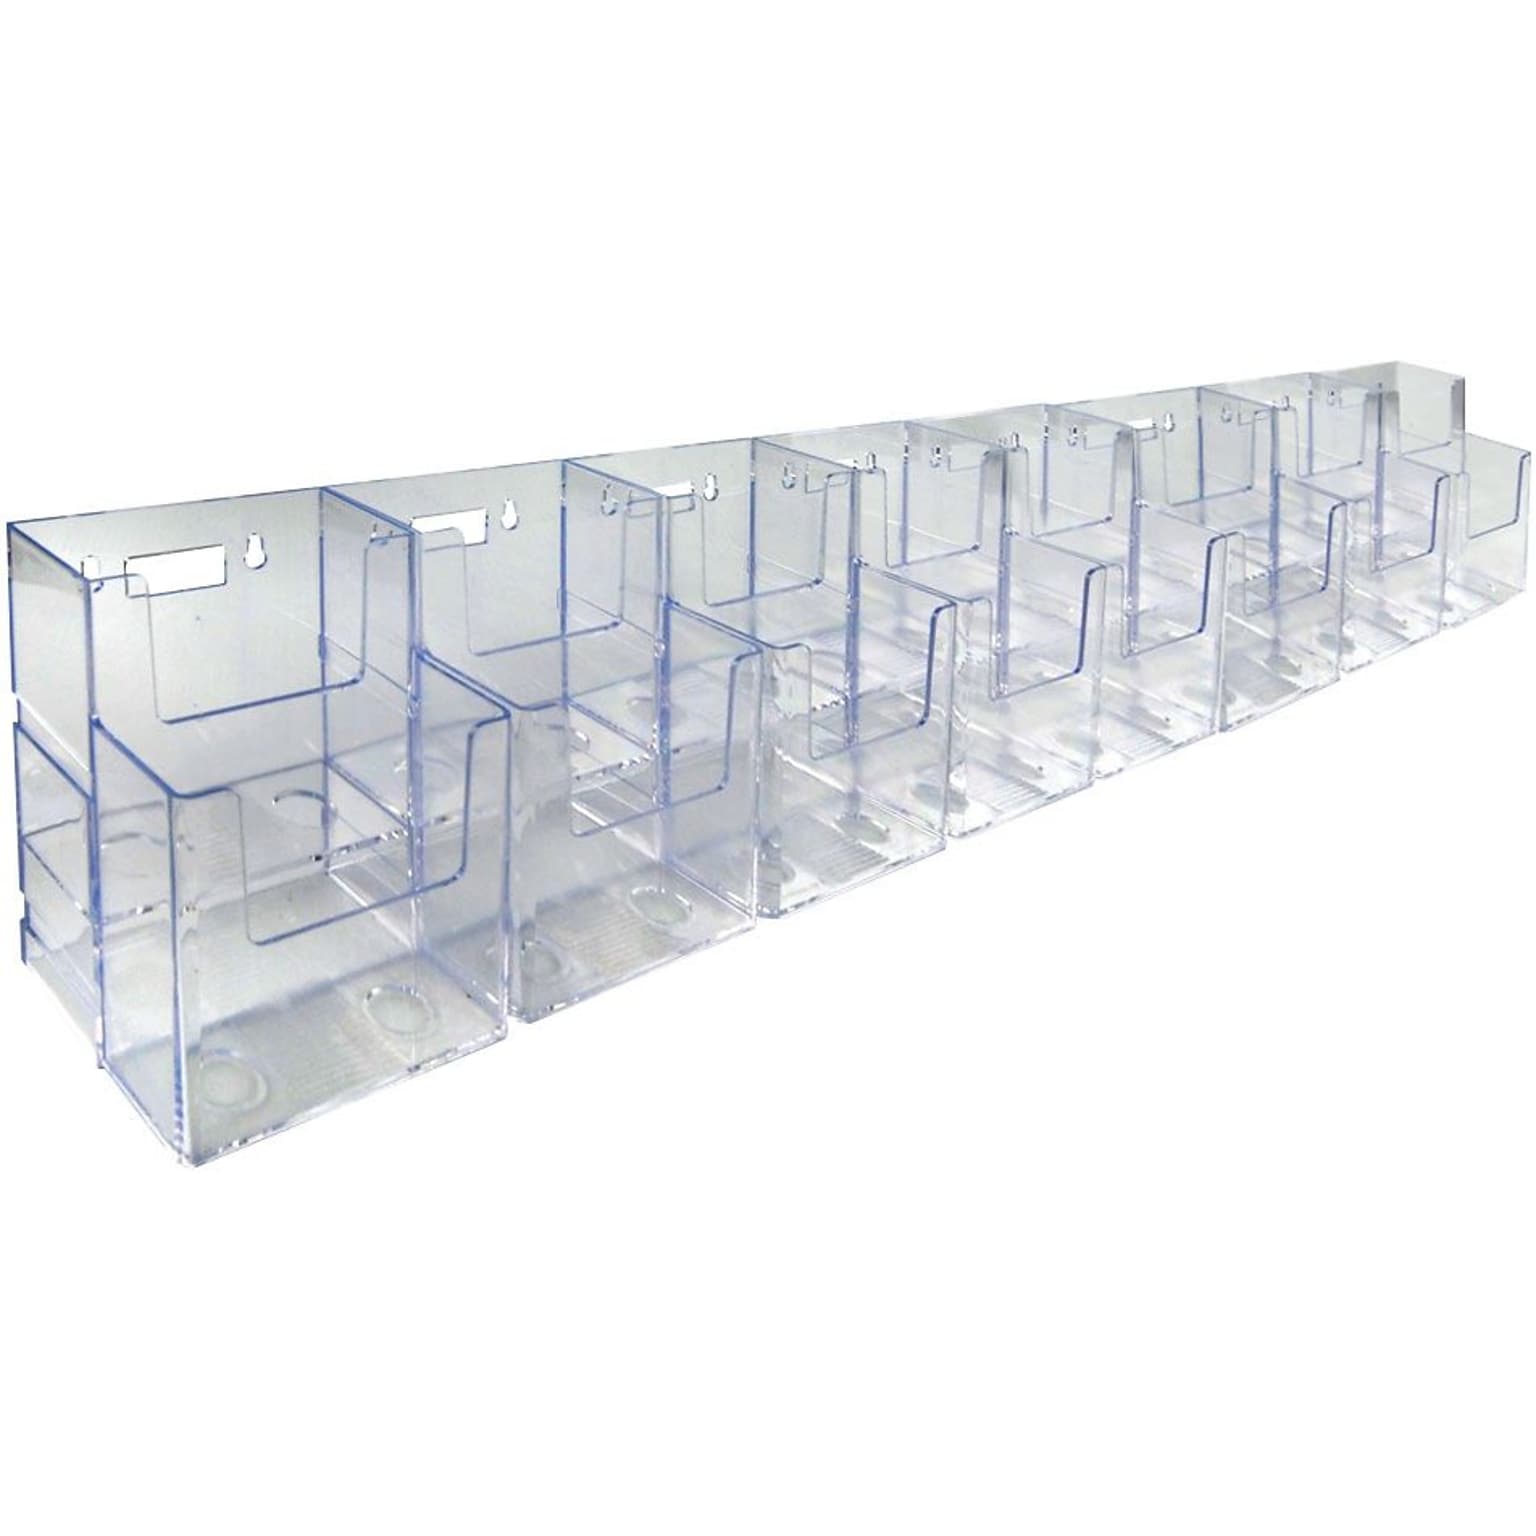 Azar Displays Two-Tiered Tri-Fold Brochure Counter Holder, Clear, Acrylic (252816)